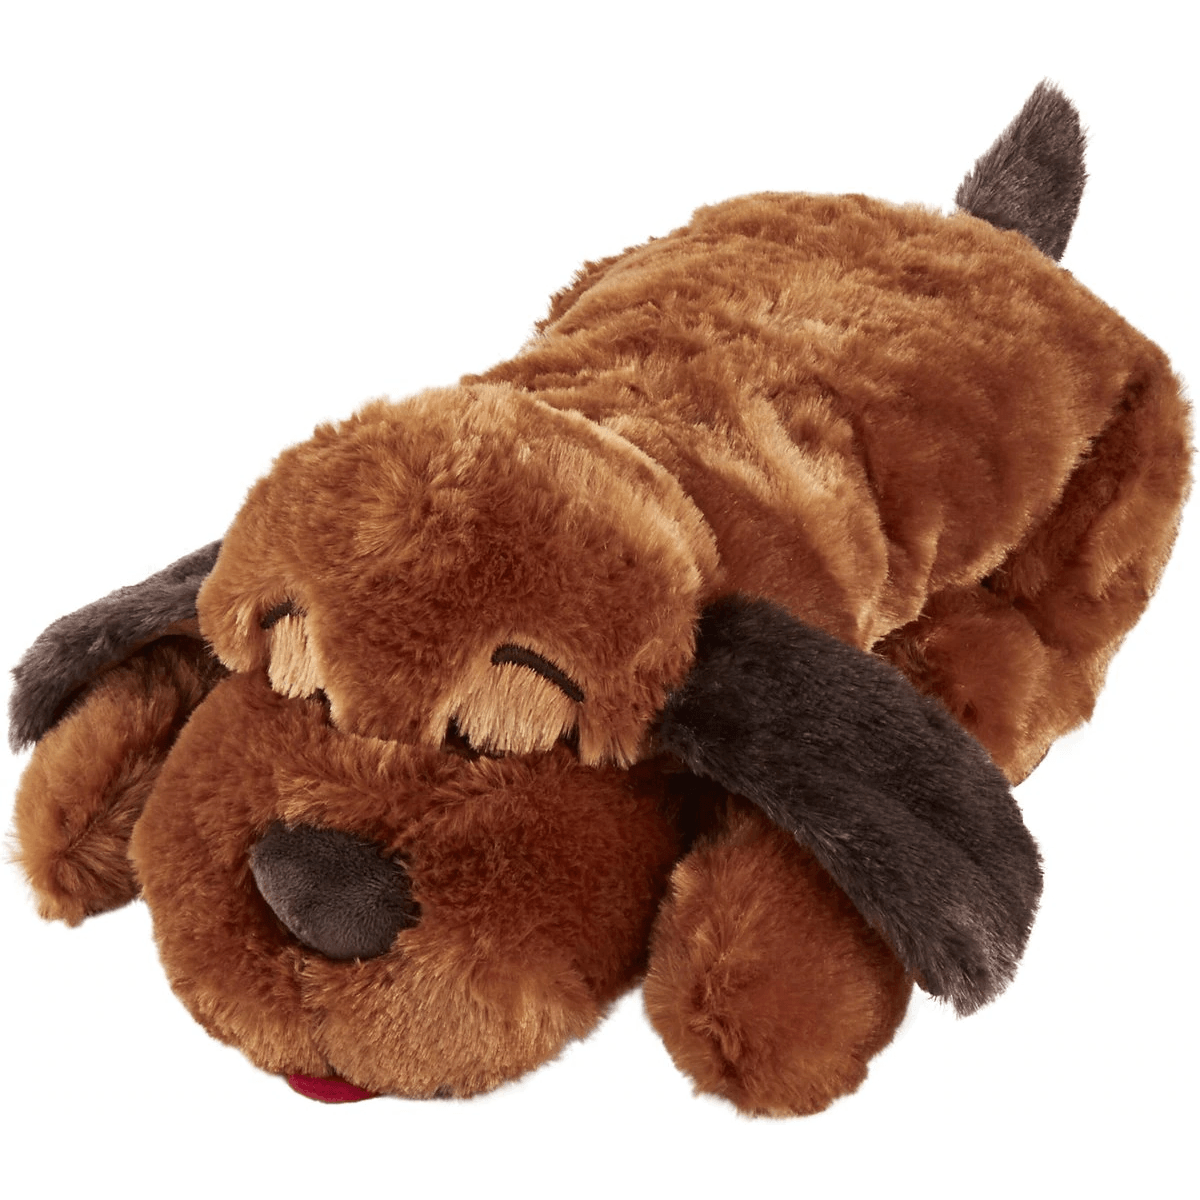 Smart Pet Love Snuggle Puppy Behavioral Aid Toy Brown